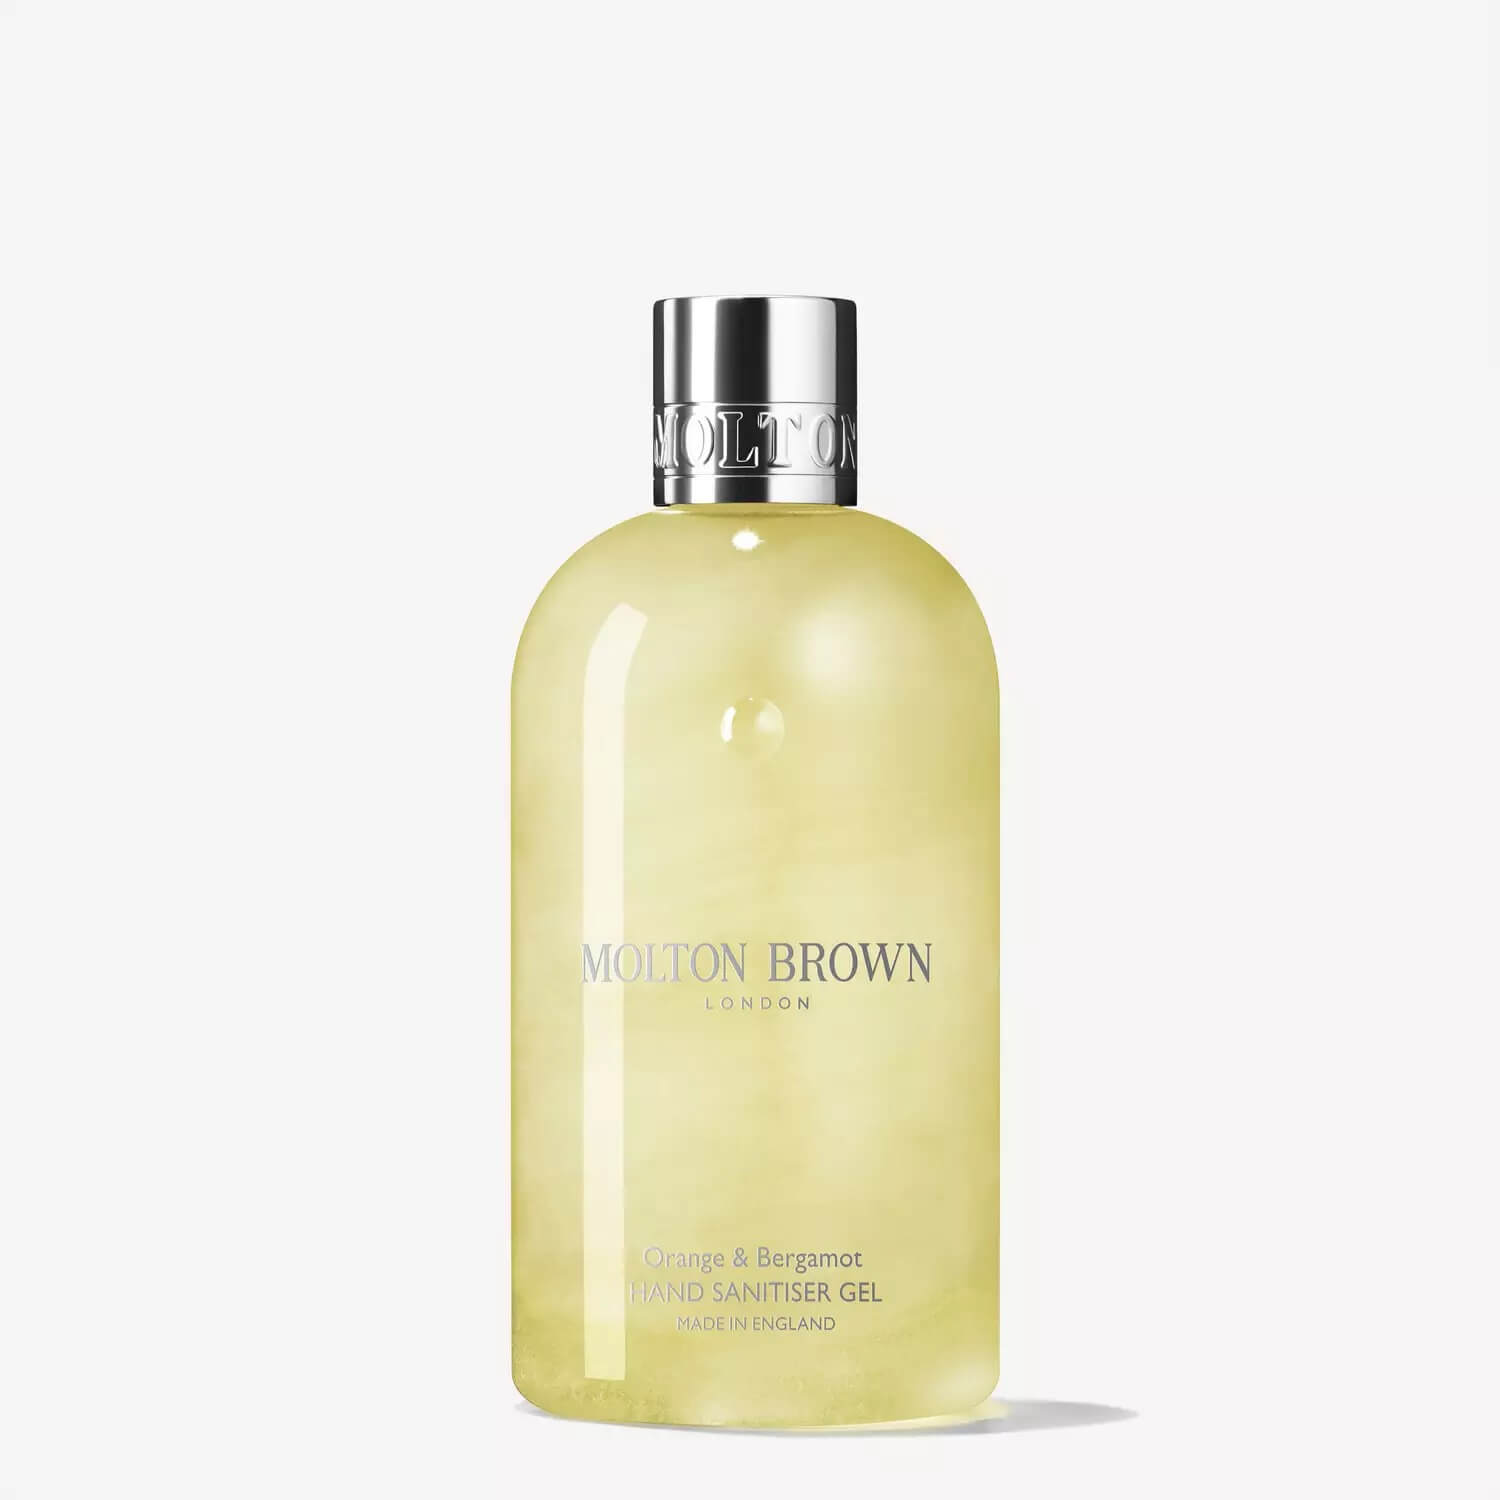 A glimpse of diverse products by Molton Brown, supporting the UK economy on YouK.